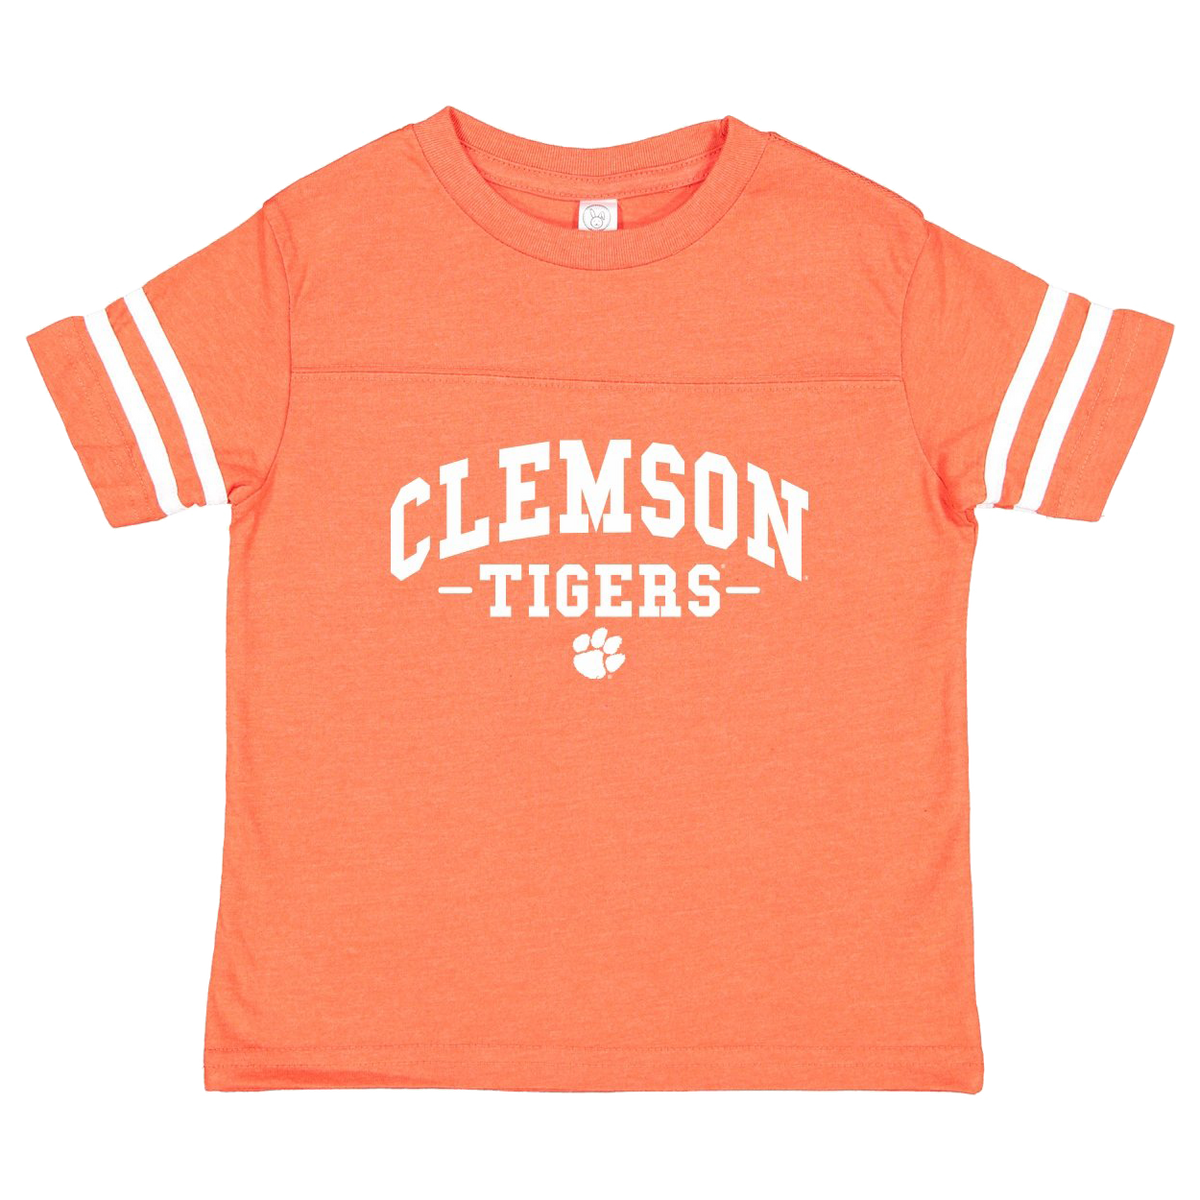 Toddler Tee Football With Clemson Tigers Stacked